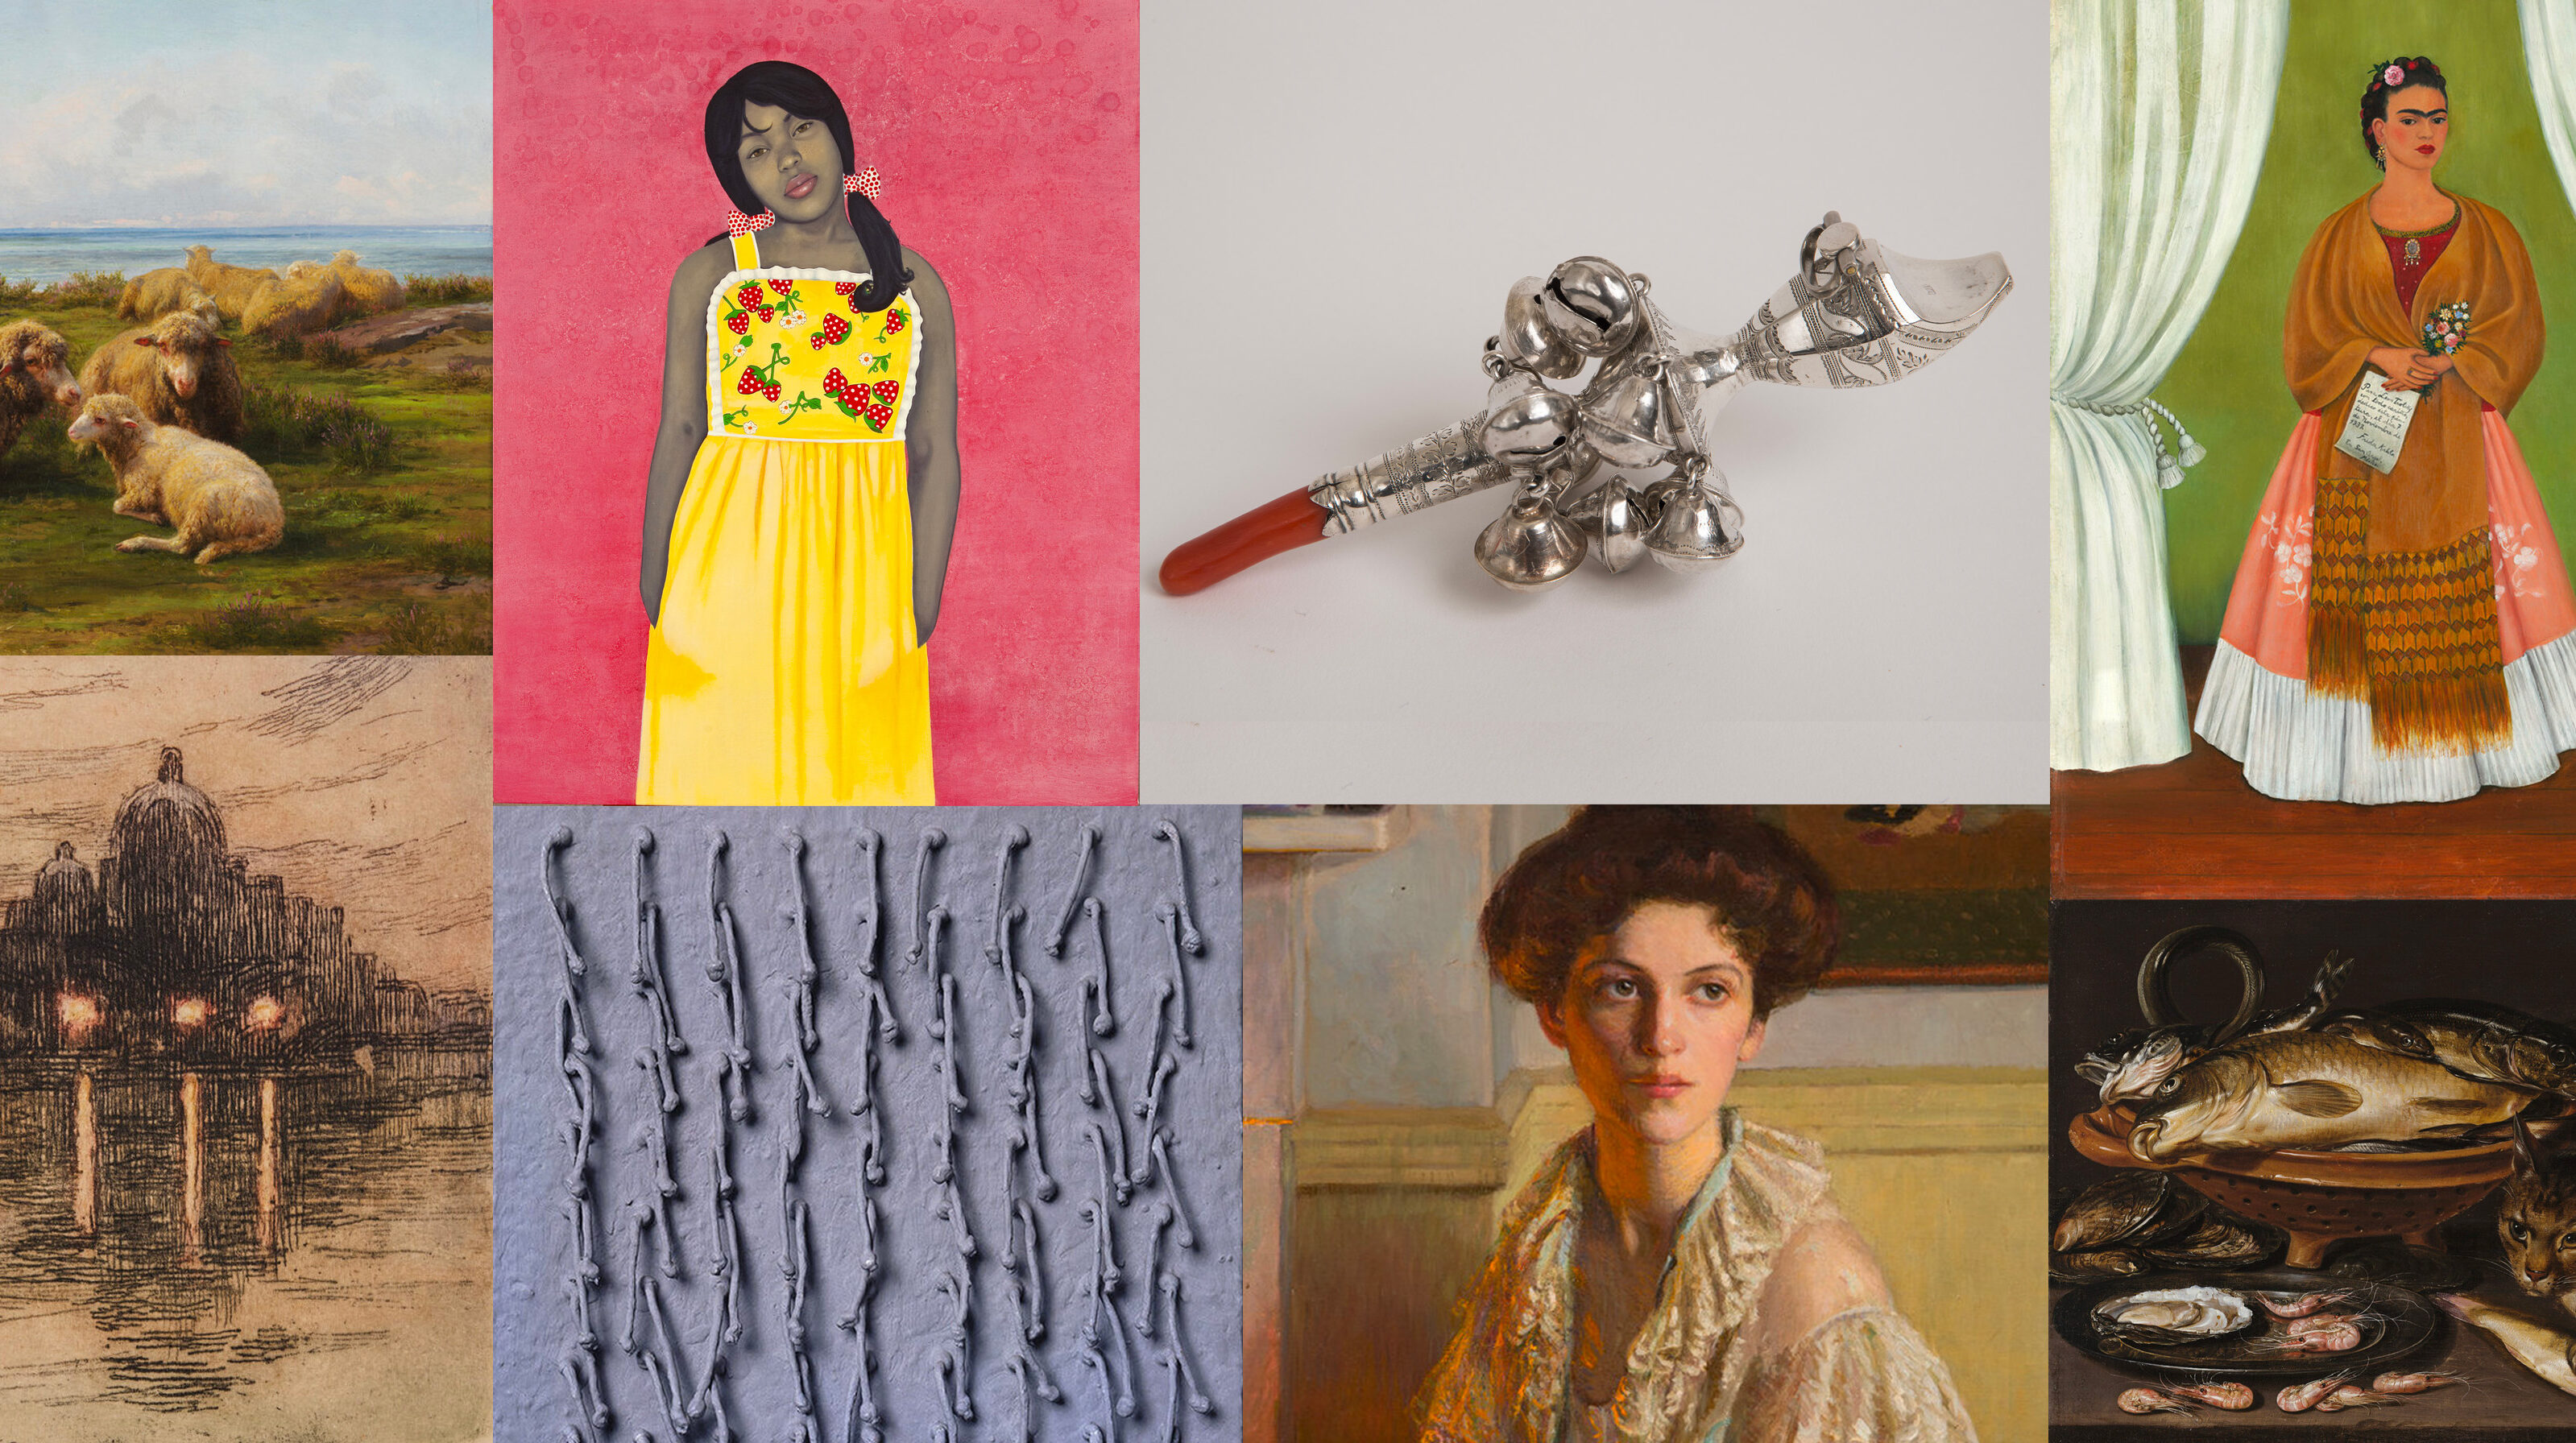 A collage of 8 artworks tiled. Clockwise from upper left: landscape with sheep, portrait of a girl in a yellow dress, a silver rattle, a portrait of a woman with a shawl holding a note, a still life of fish and a cat, a portrait of a woman wearing a bun, a relief of draped string, and a print of buildings by the water at night.